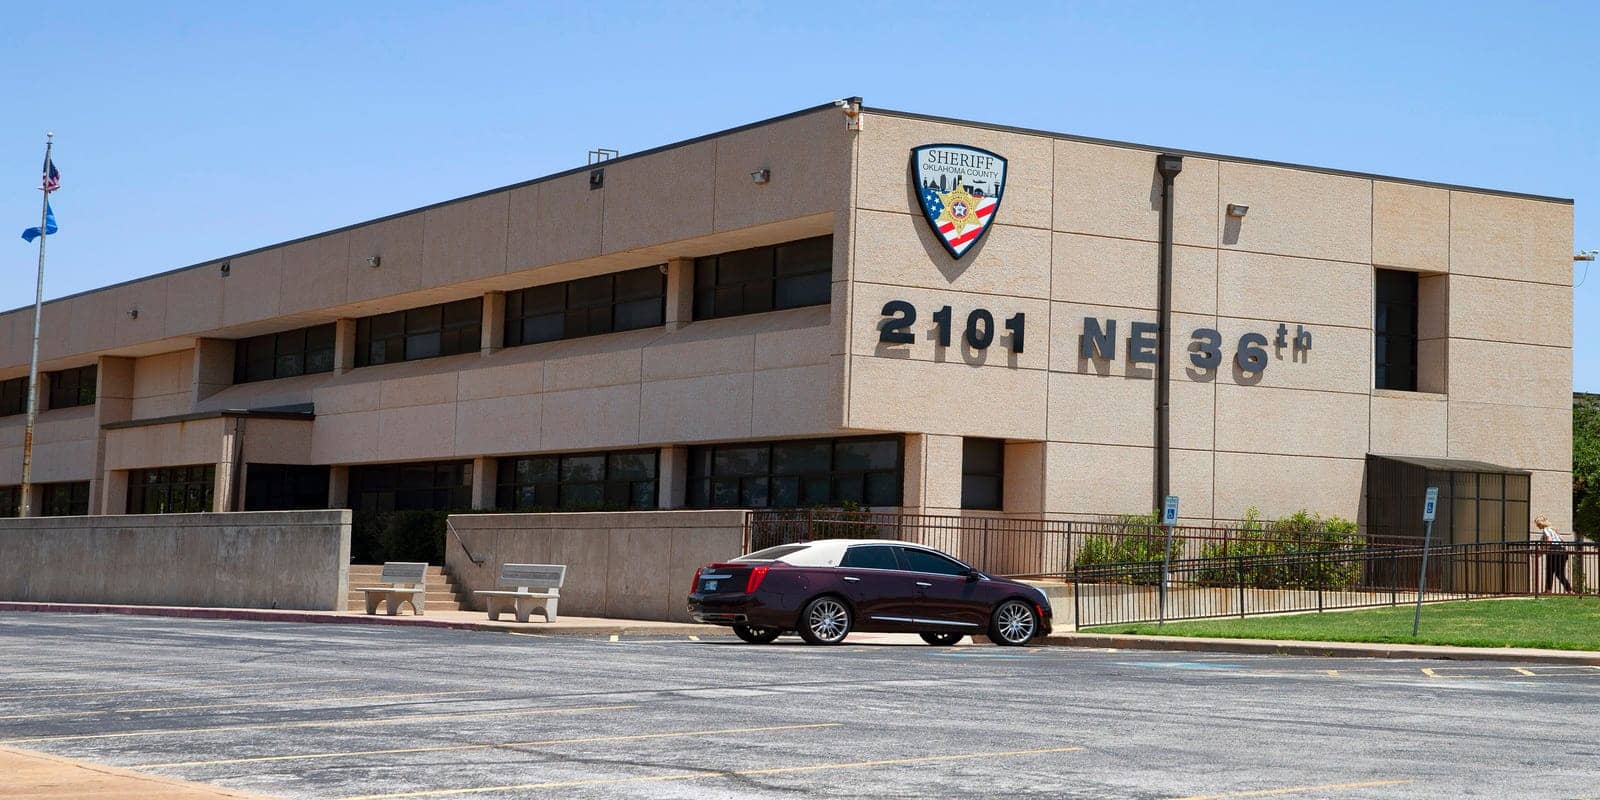 Image of Oklahoma County Sheriff's Office